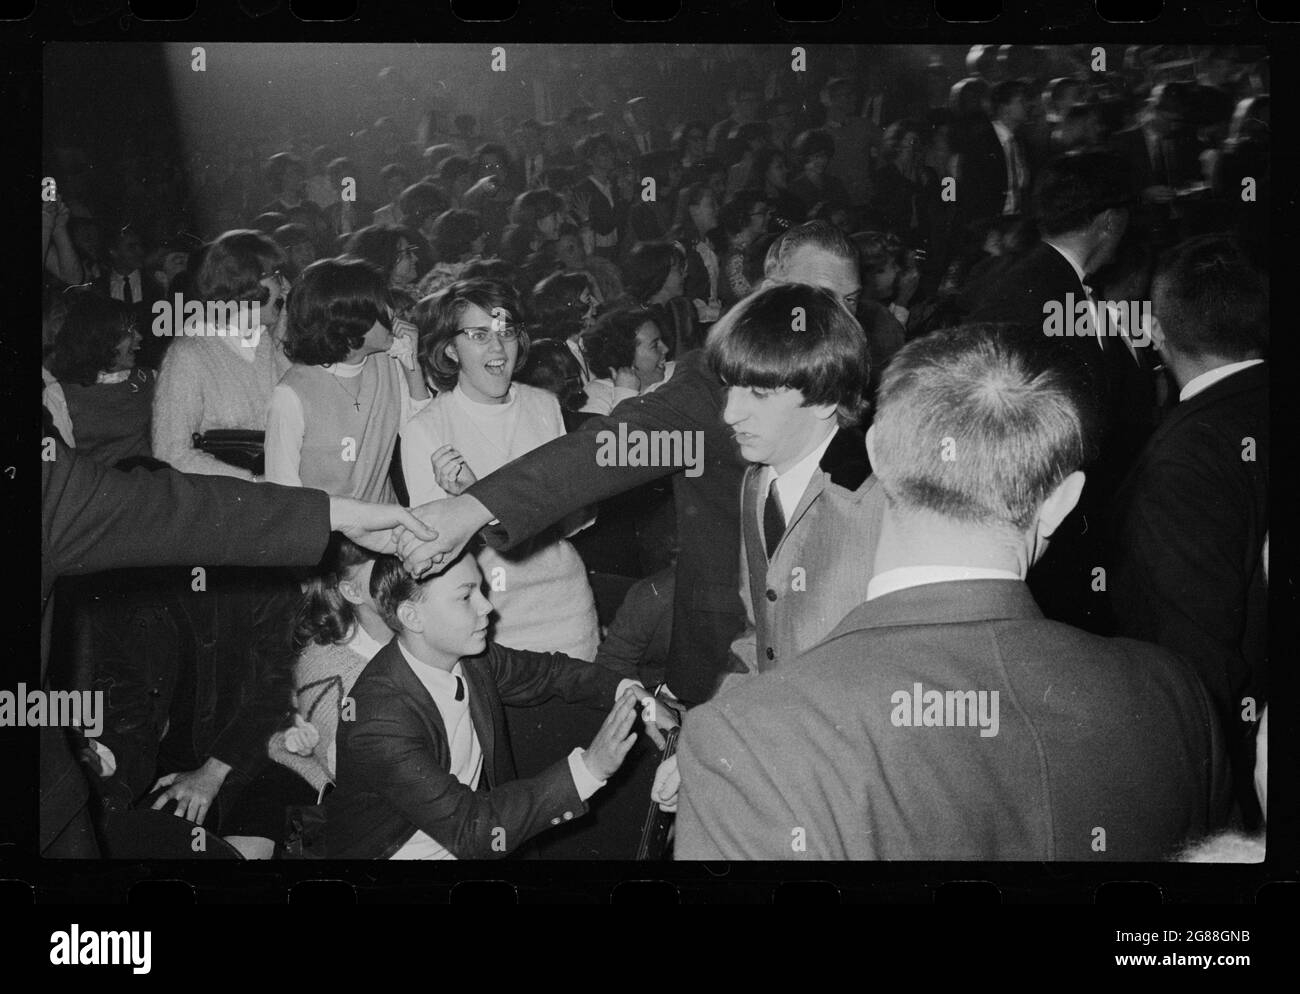 Beatles fans at the Washington Coliseum, February 11, 1964. Shouting fans in the audience. Ringo Starr walking by. Trikosko, Marion S., photographer. Stock Photo